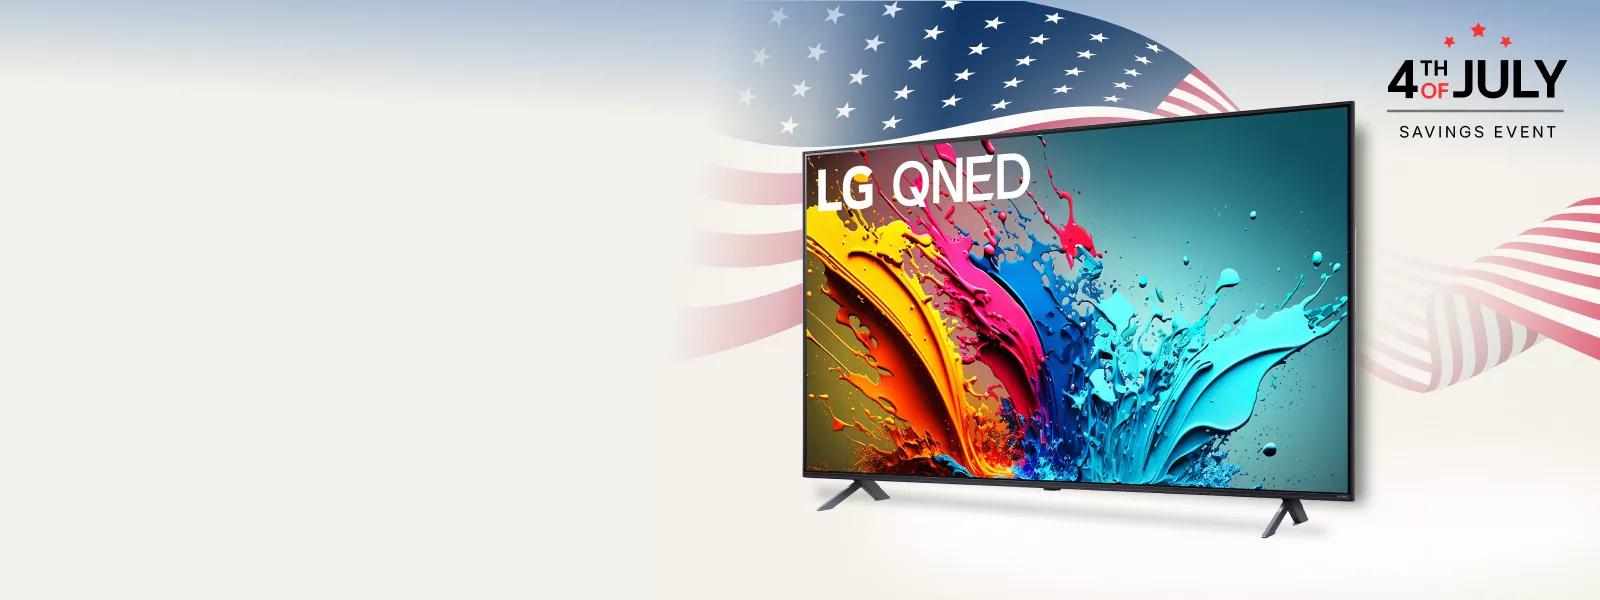 2024 4th of July Savings Even - Powered by Quantum Dot and NanoCell technology, experience color like never before with a mesmerizing LG QNED TV. 